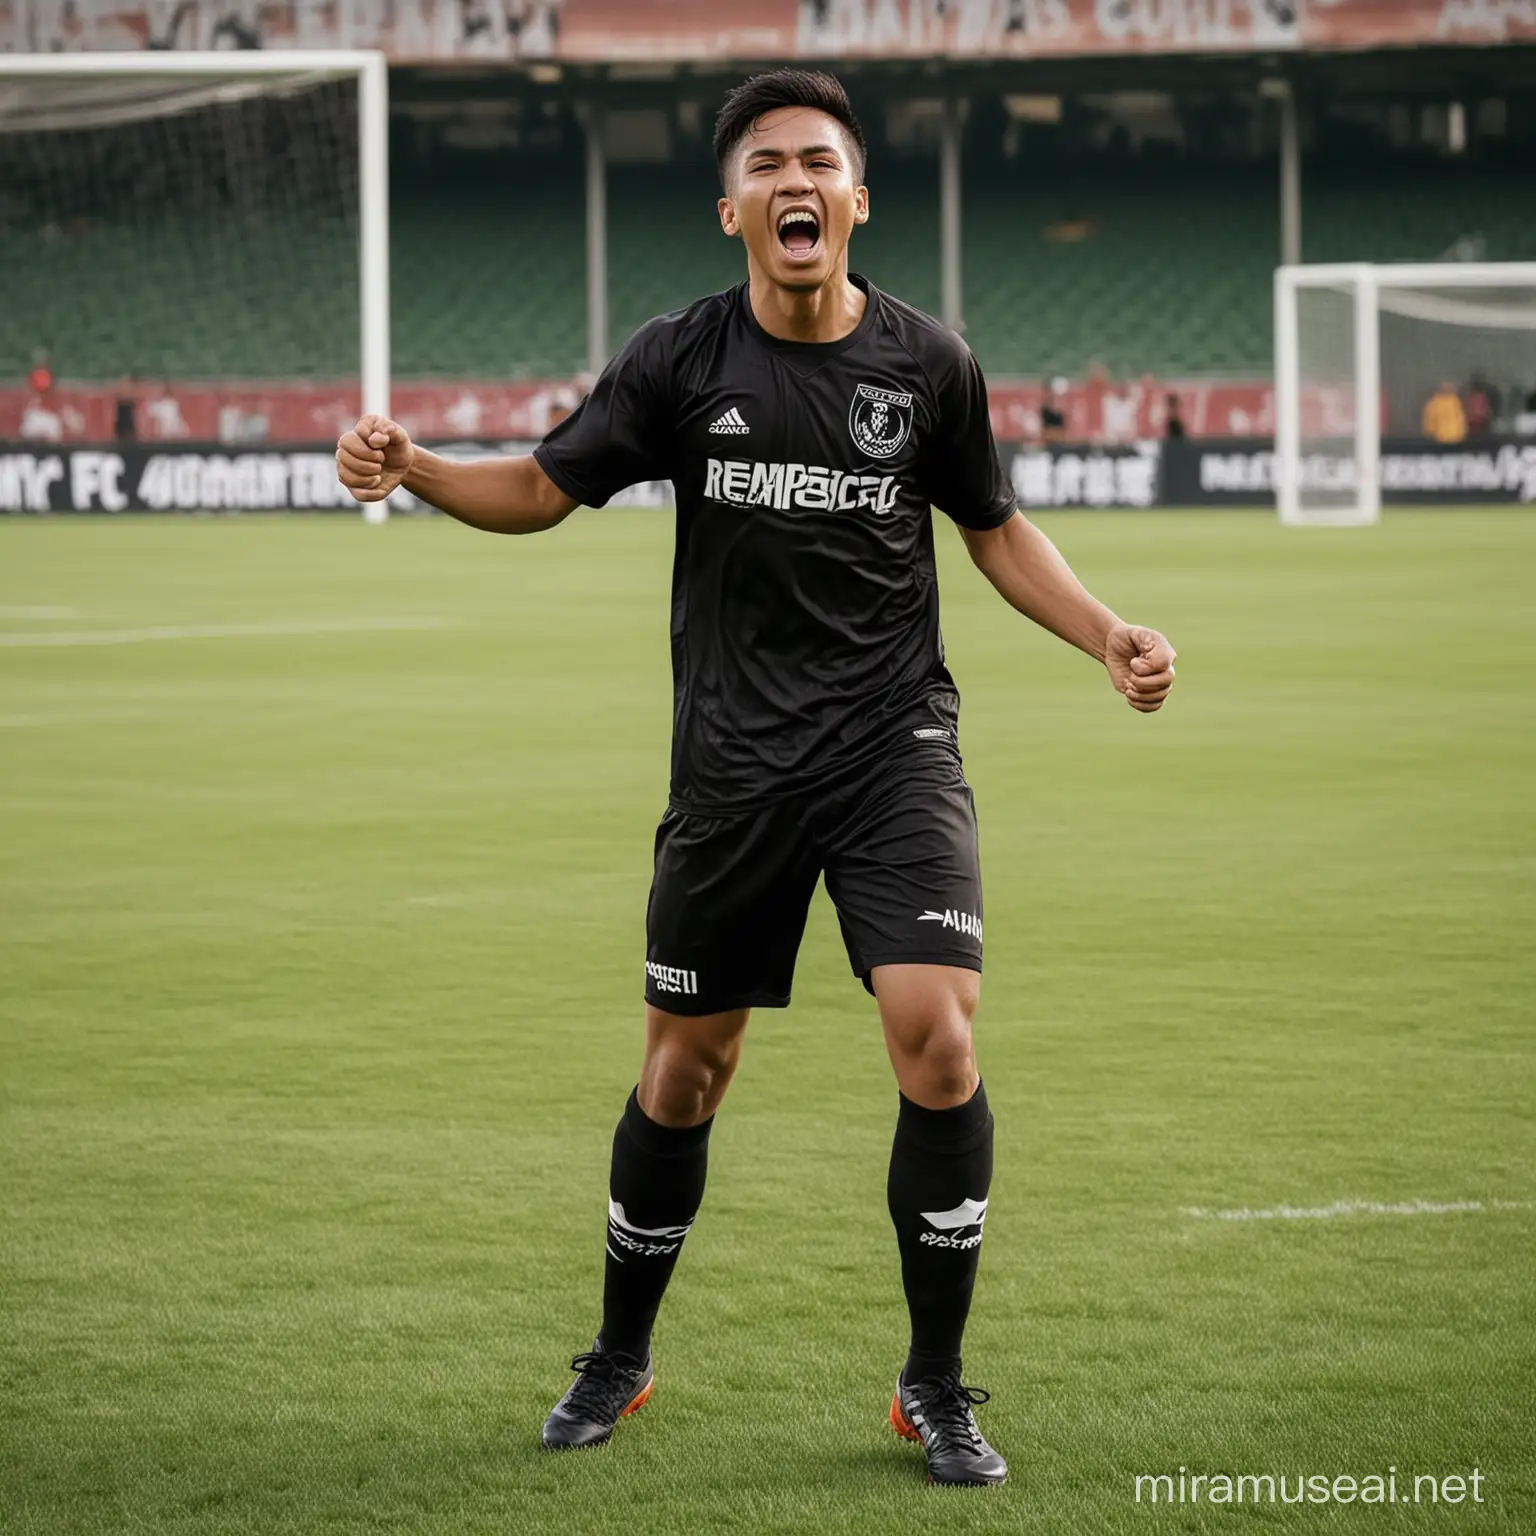 photo of a soccer player Indonesian  wearing a black team shirt with the words "REMPAS FC" on the front of the shirt, black drawstring, black socks, black soccer shoes, celebrating victory with a screaming facial gesture. football field background